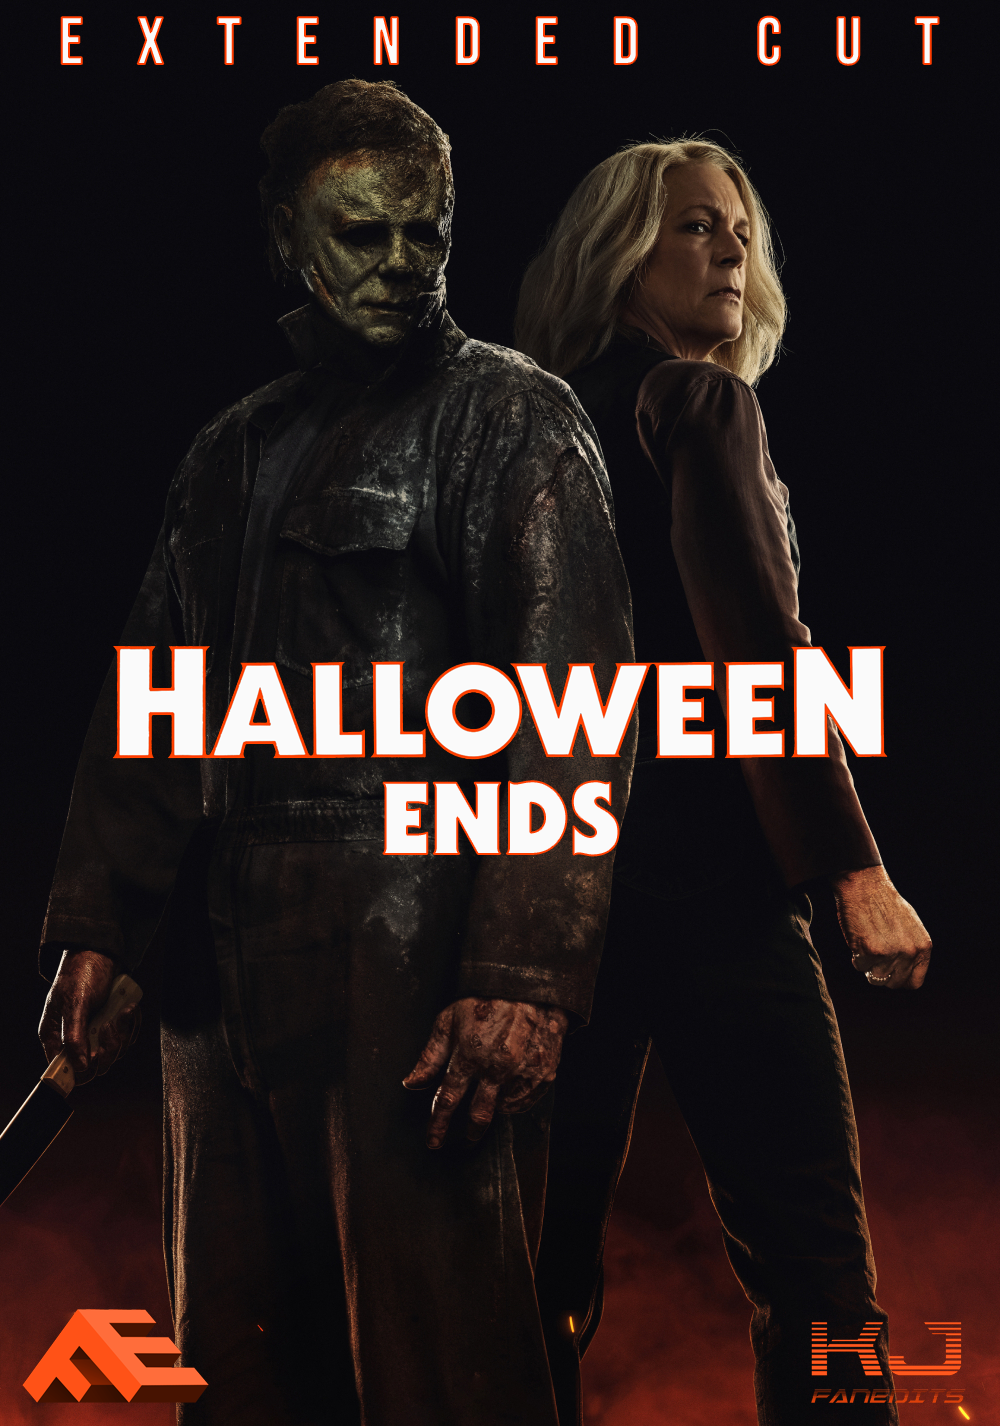 halloween ends extended cut poster redesign.png